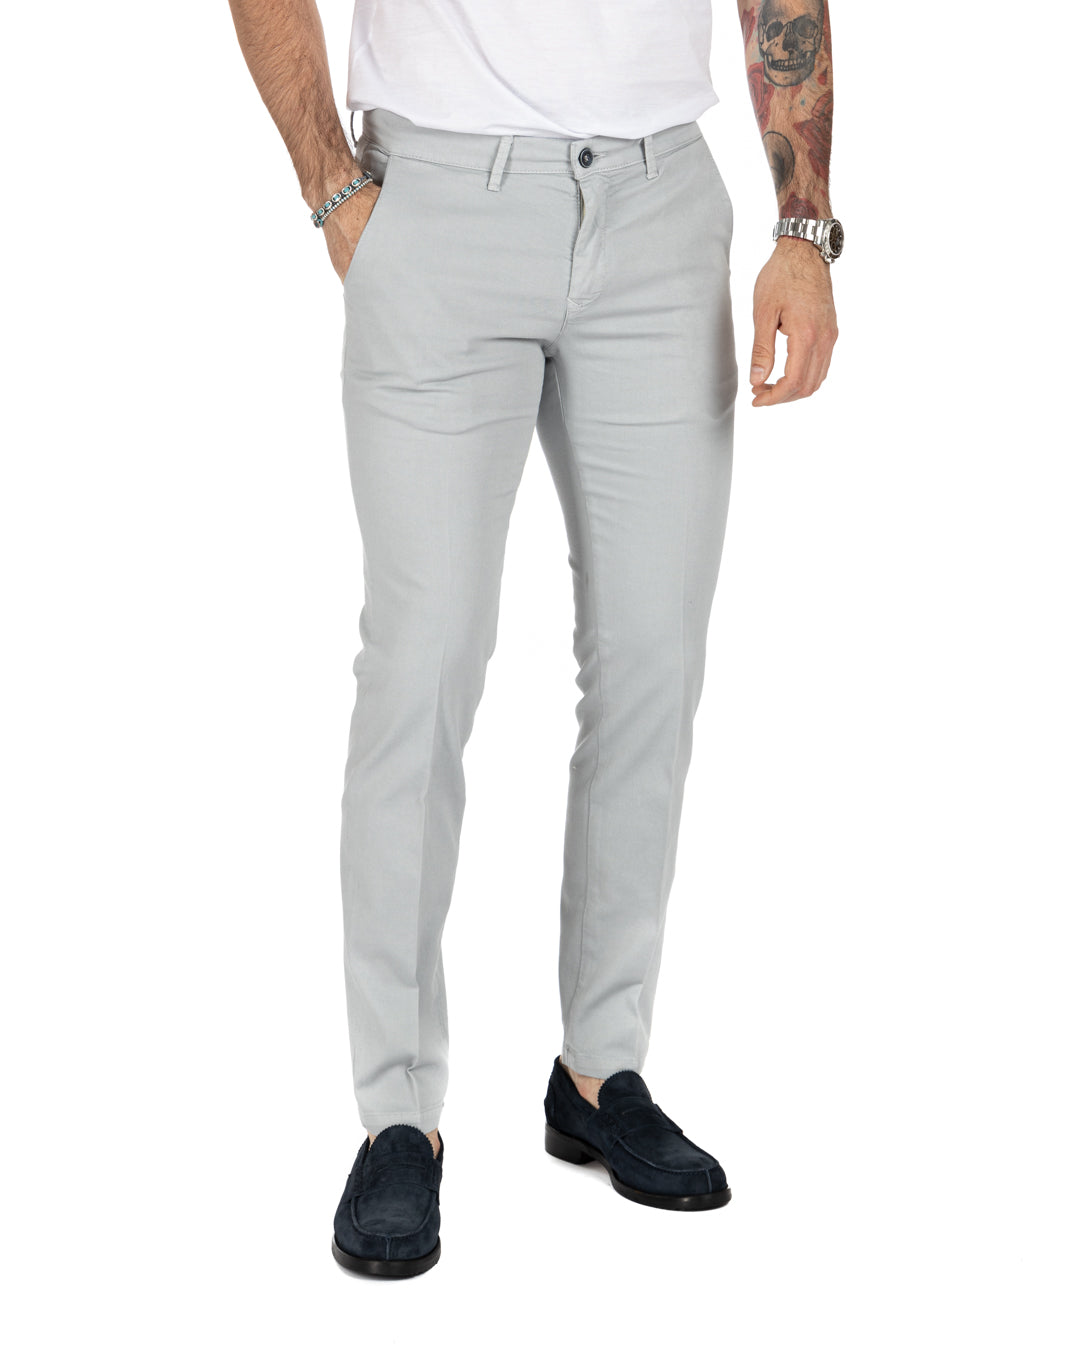 Bill - gray armored trousers